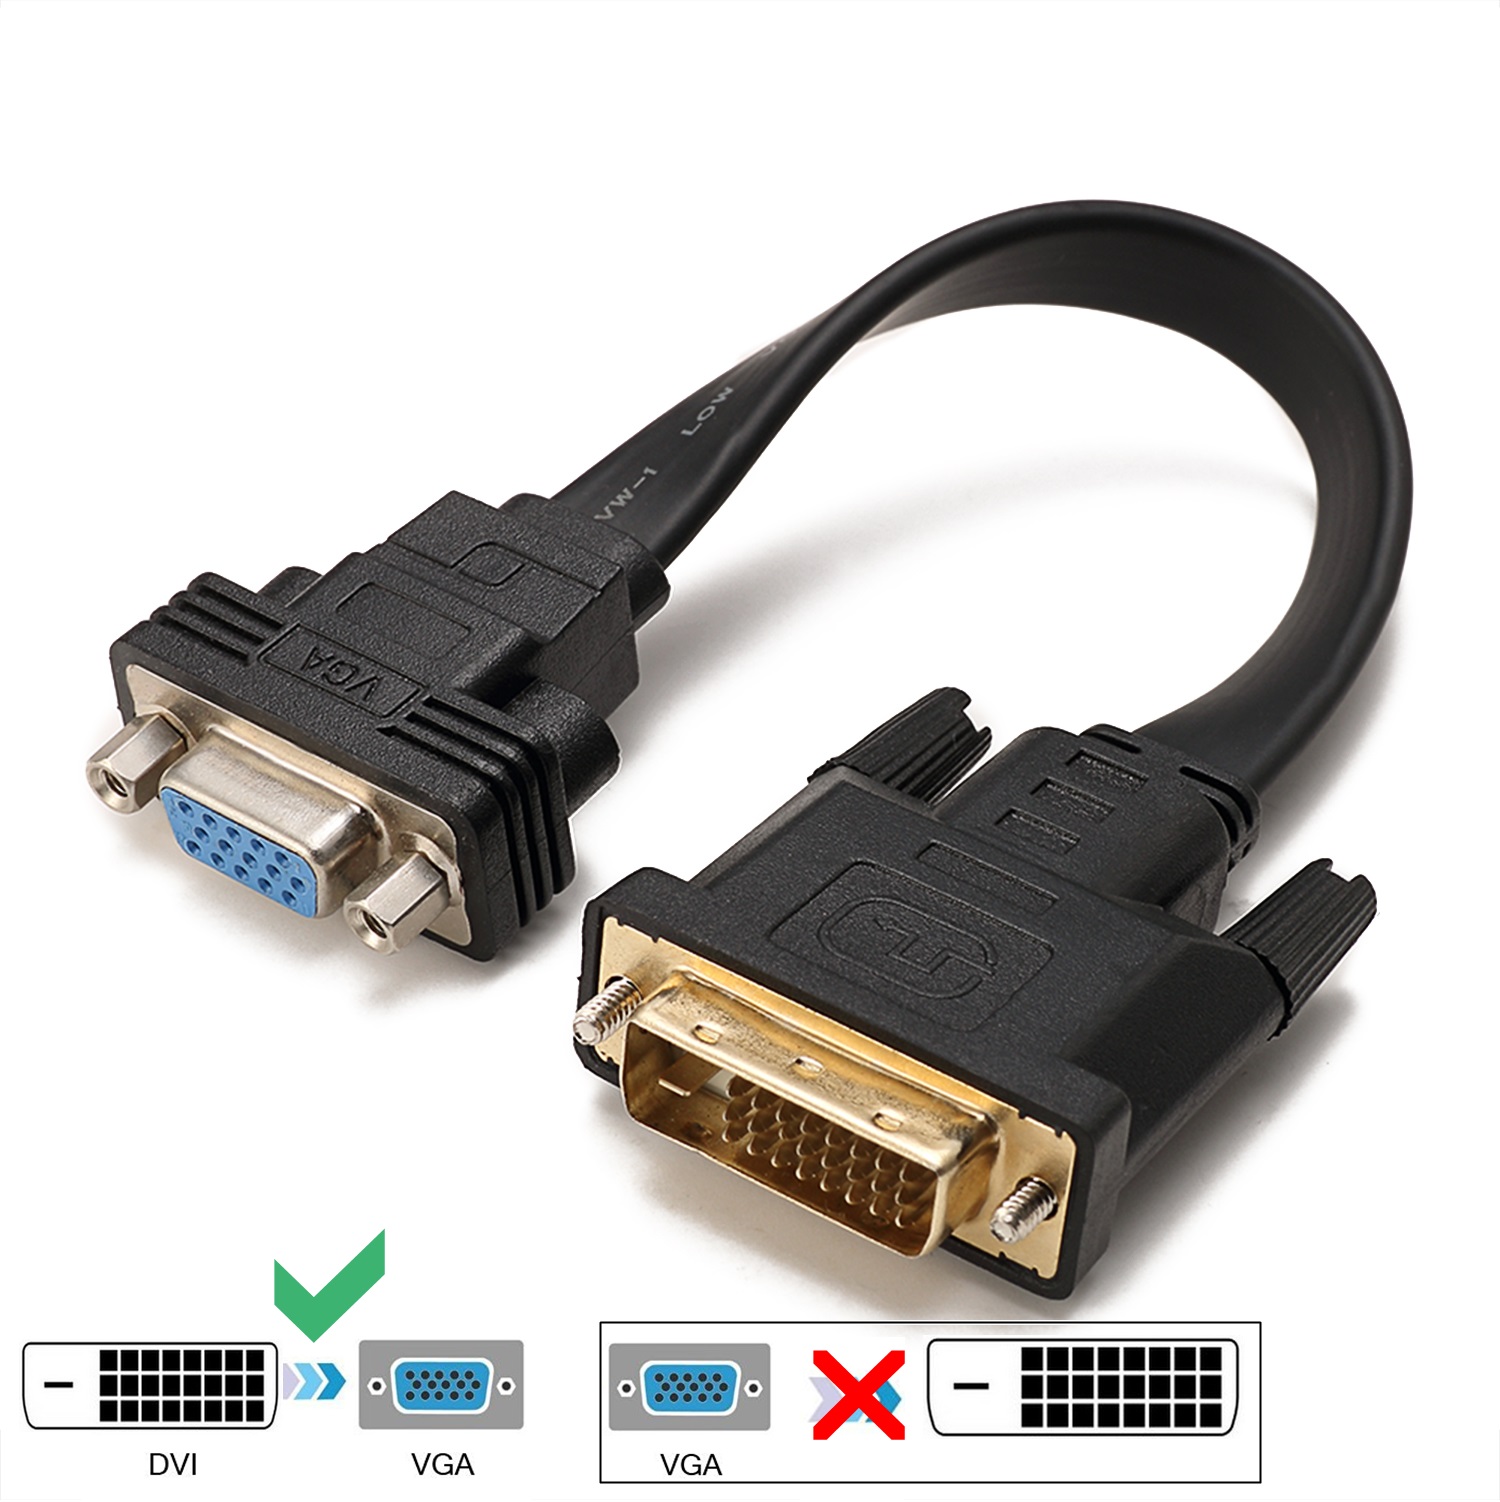 CABLEDECONN Active DVI-D Dual Link 24+1 Male to VGA Female Video with Flat Cable Adapter Converter Black (E0207)